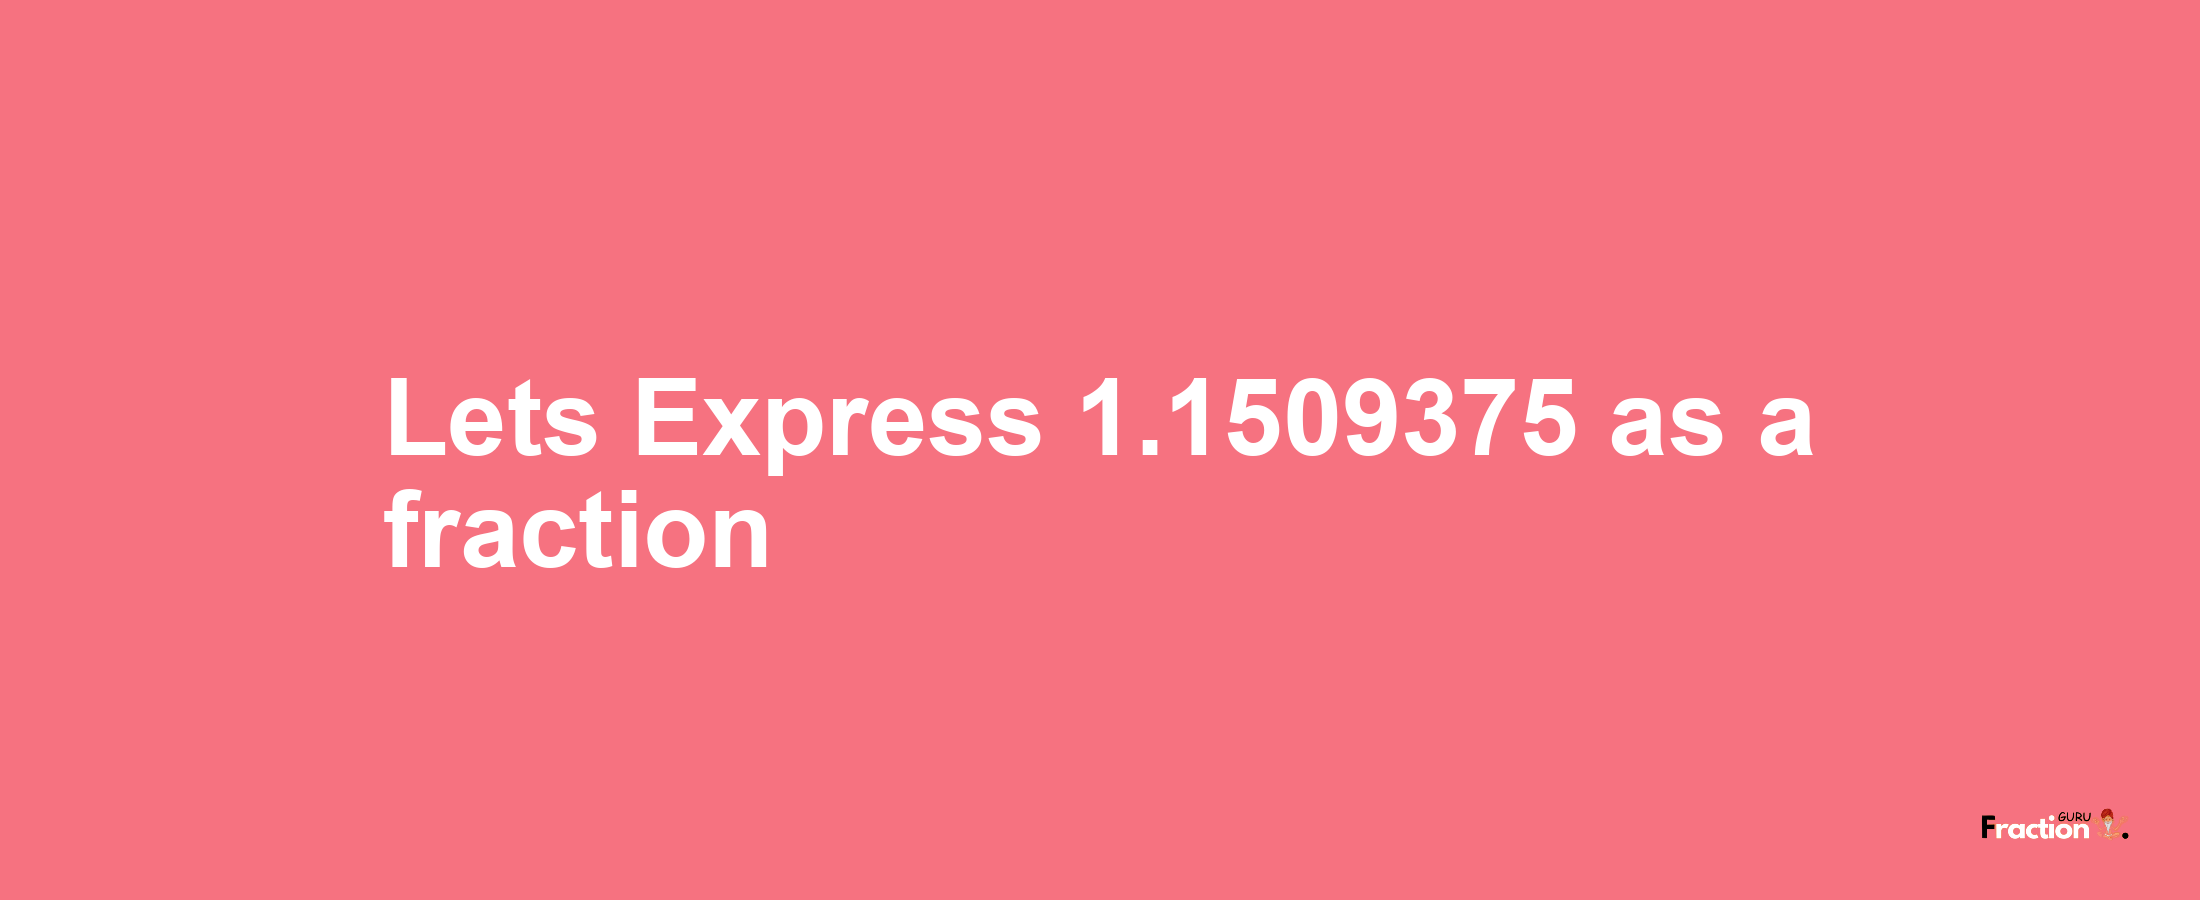 Lets Express 1.1509375 as afraction